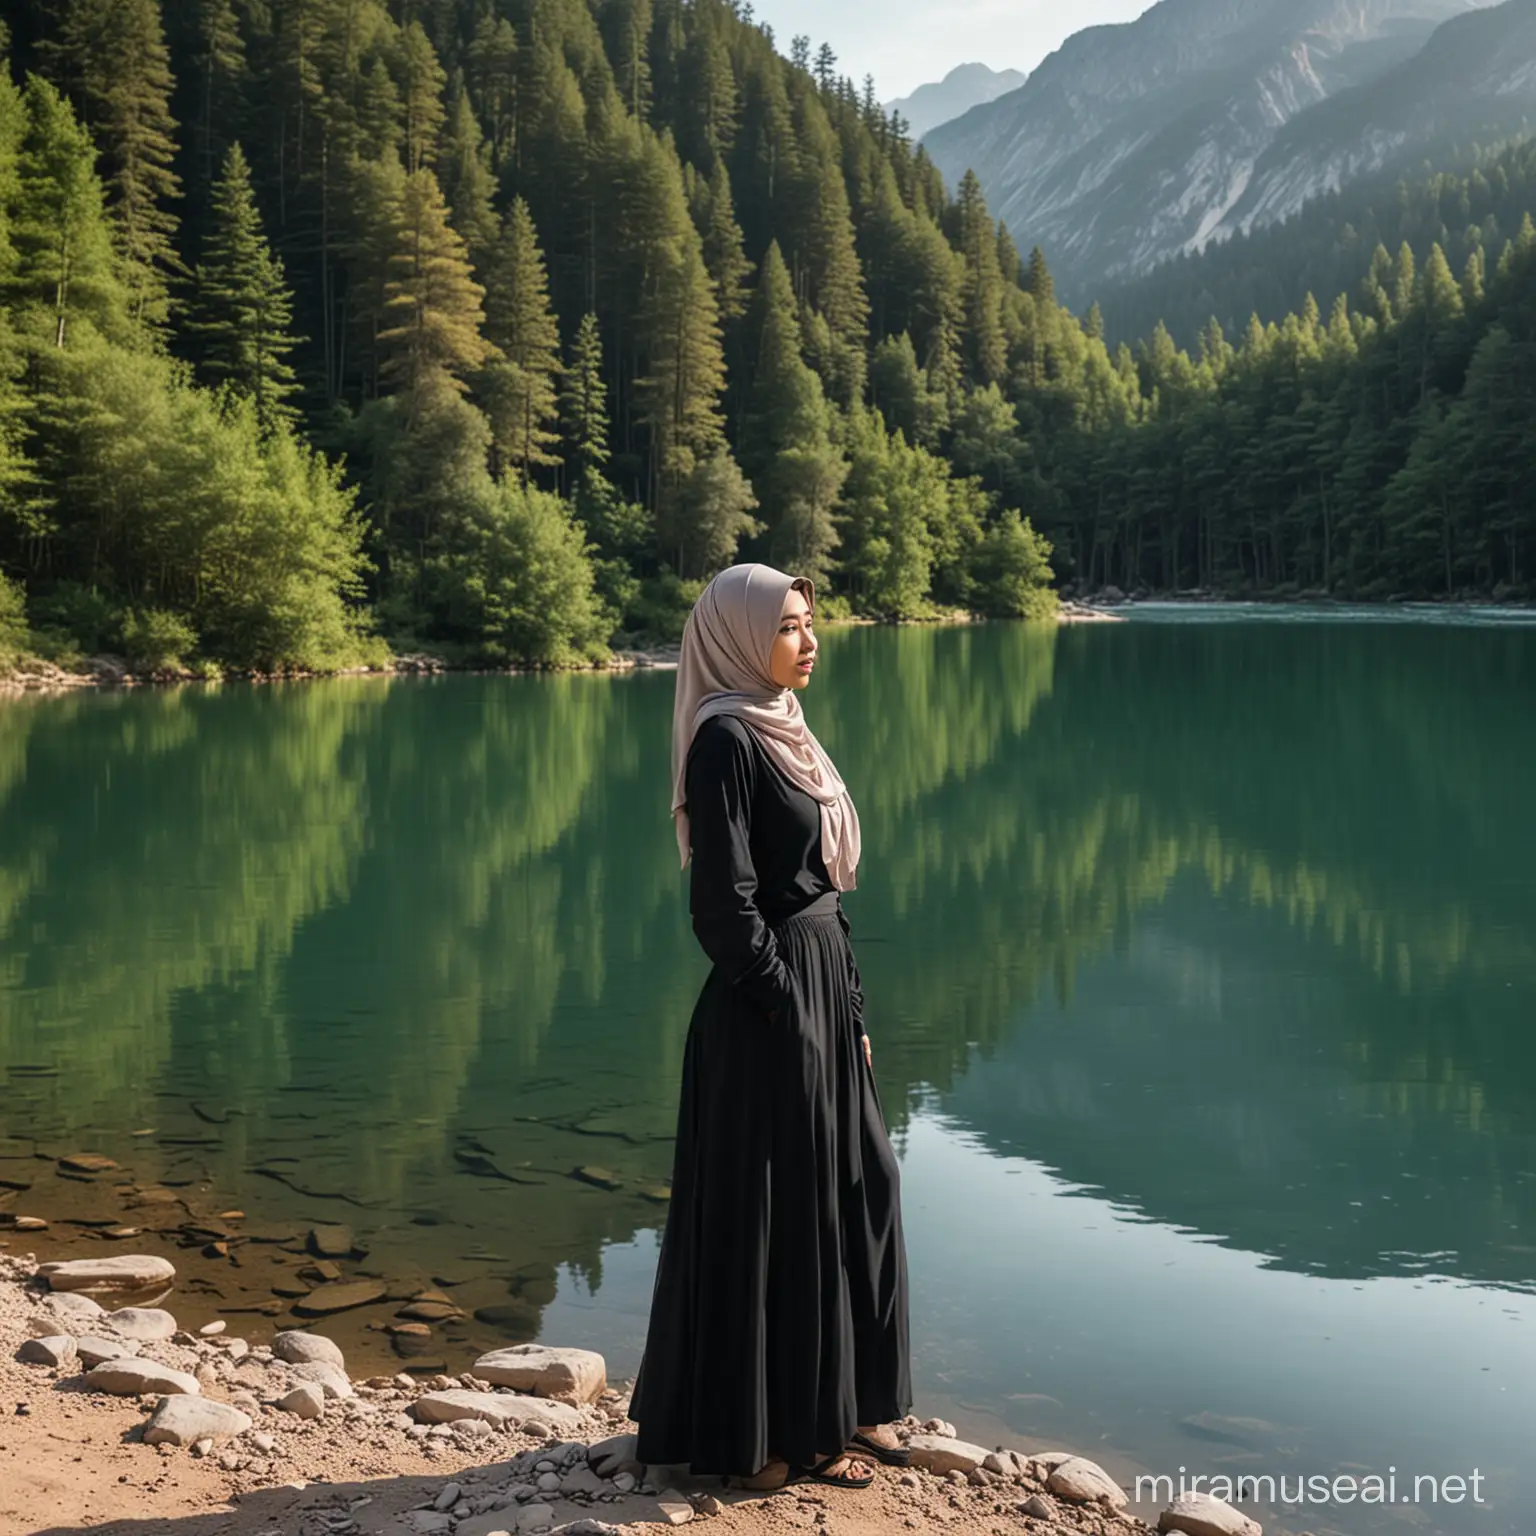 Asian Woman in Hijab Standing by Serene Lake with Mountain Scenery